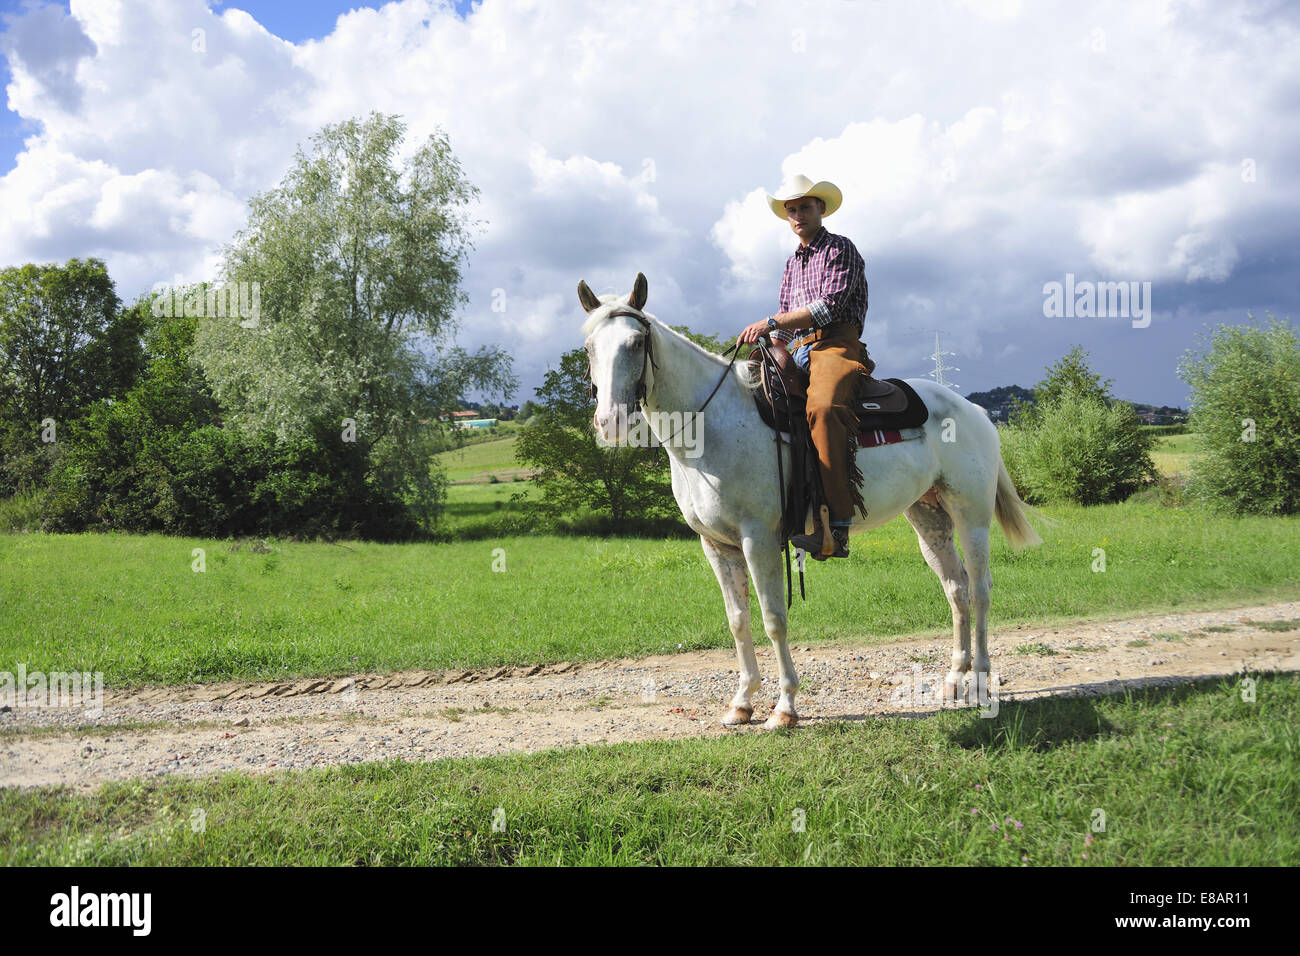 Portrait of young man in cowboy gear on horseback on dirt track Stock Photo